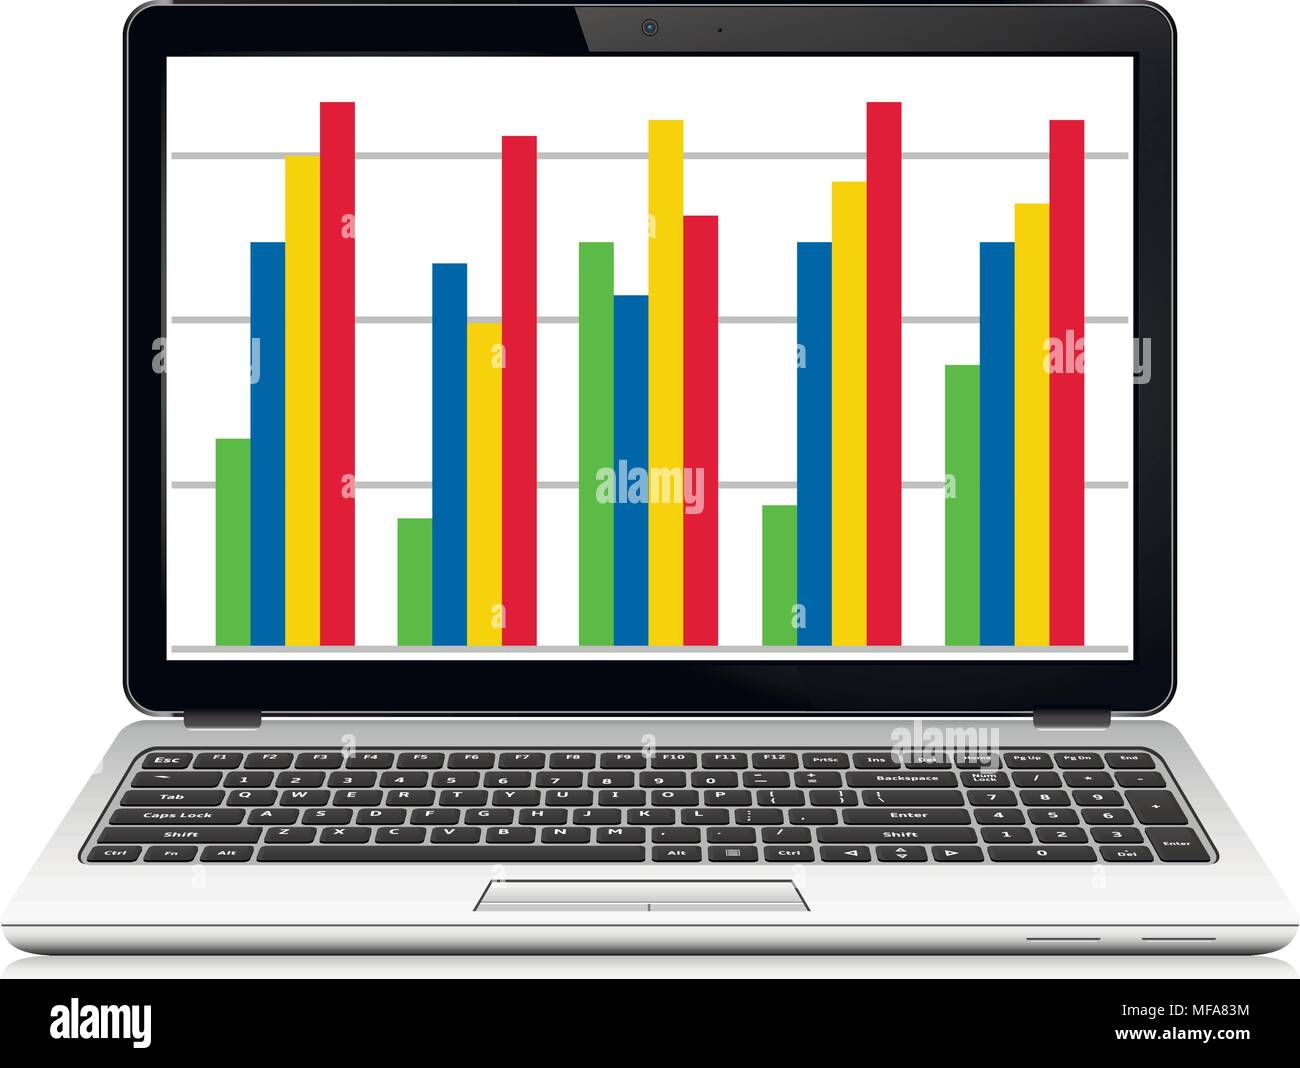 Laptop computer with graph on the screen. Online business analytics concept. Vector illustration. Stock Vector